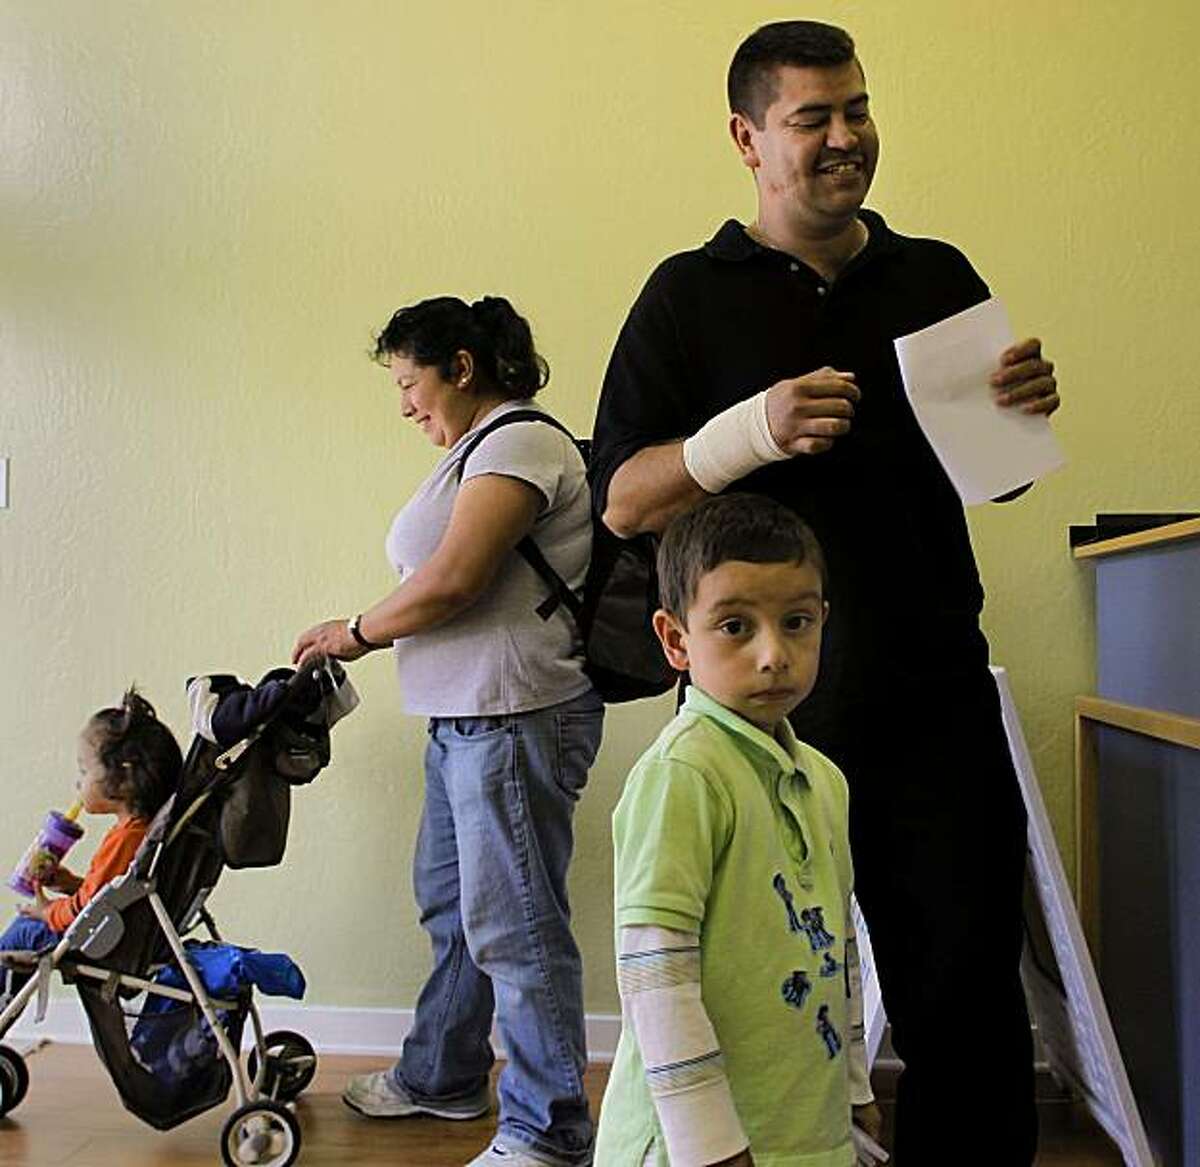 The Lopez family, Rosaure, 2, Aurelia, Sergio, 4, and Juan, who was in for a wrist injury, seeking medical attention at Clinic By The Bay, on Thursday Nov. 4, 2010 in San Francisco, Calif. The first clinic in the Bay Area and only the second in California that is staffed by retired and volunteer doctors and nurses.